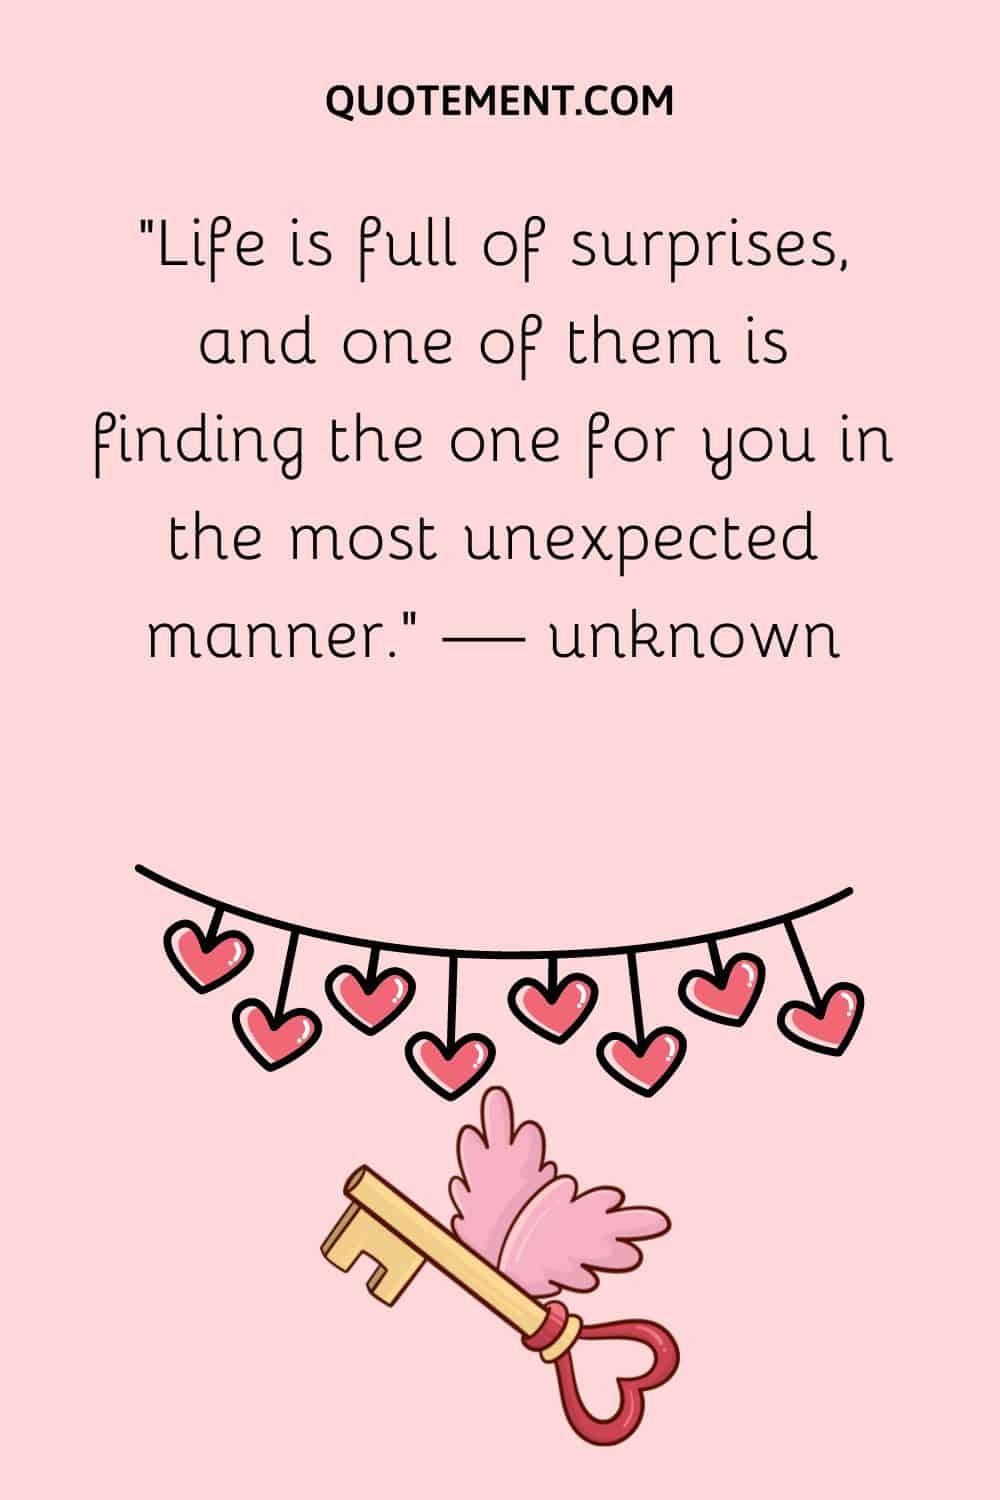 “Life is full of surprises, and one of them is finding the one for you in the most unexpected manner.” — unknown